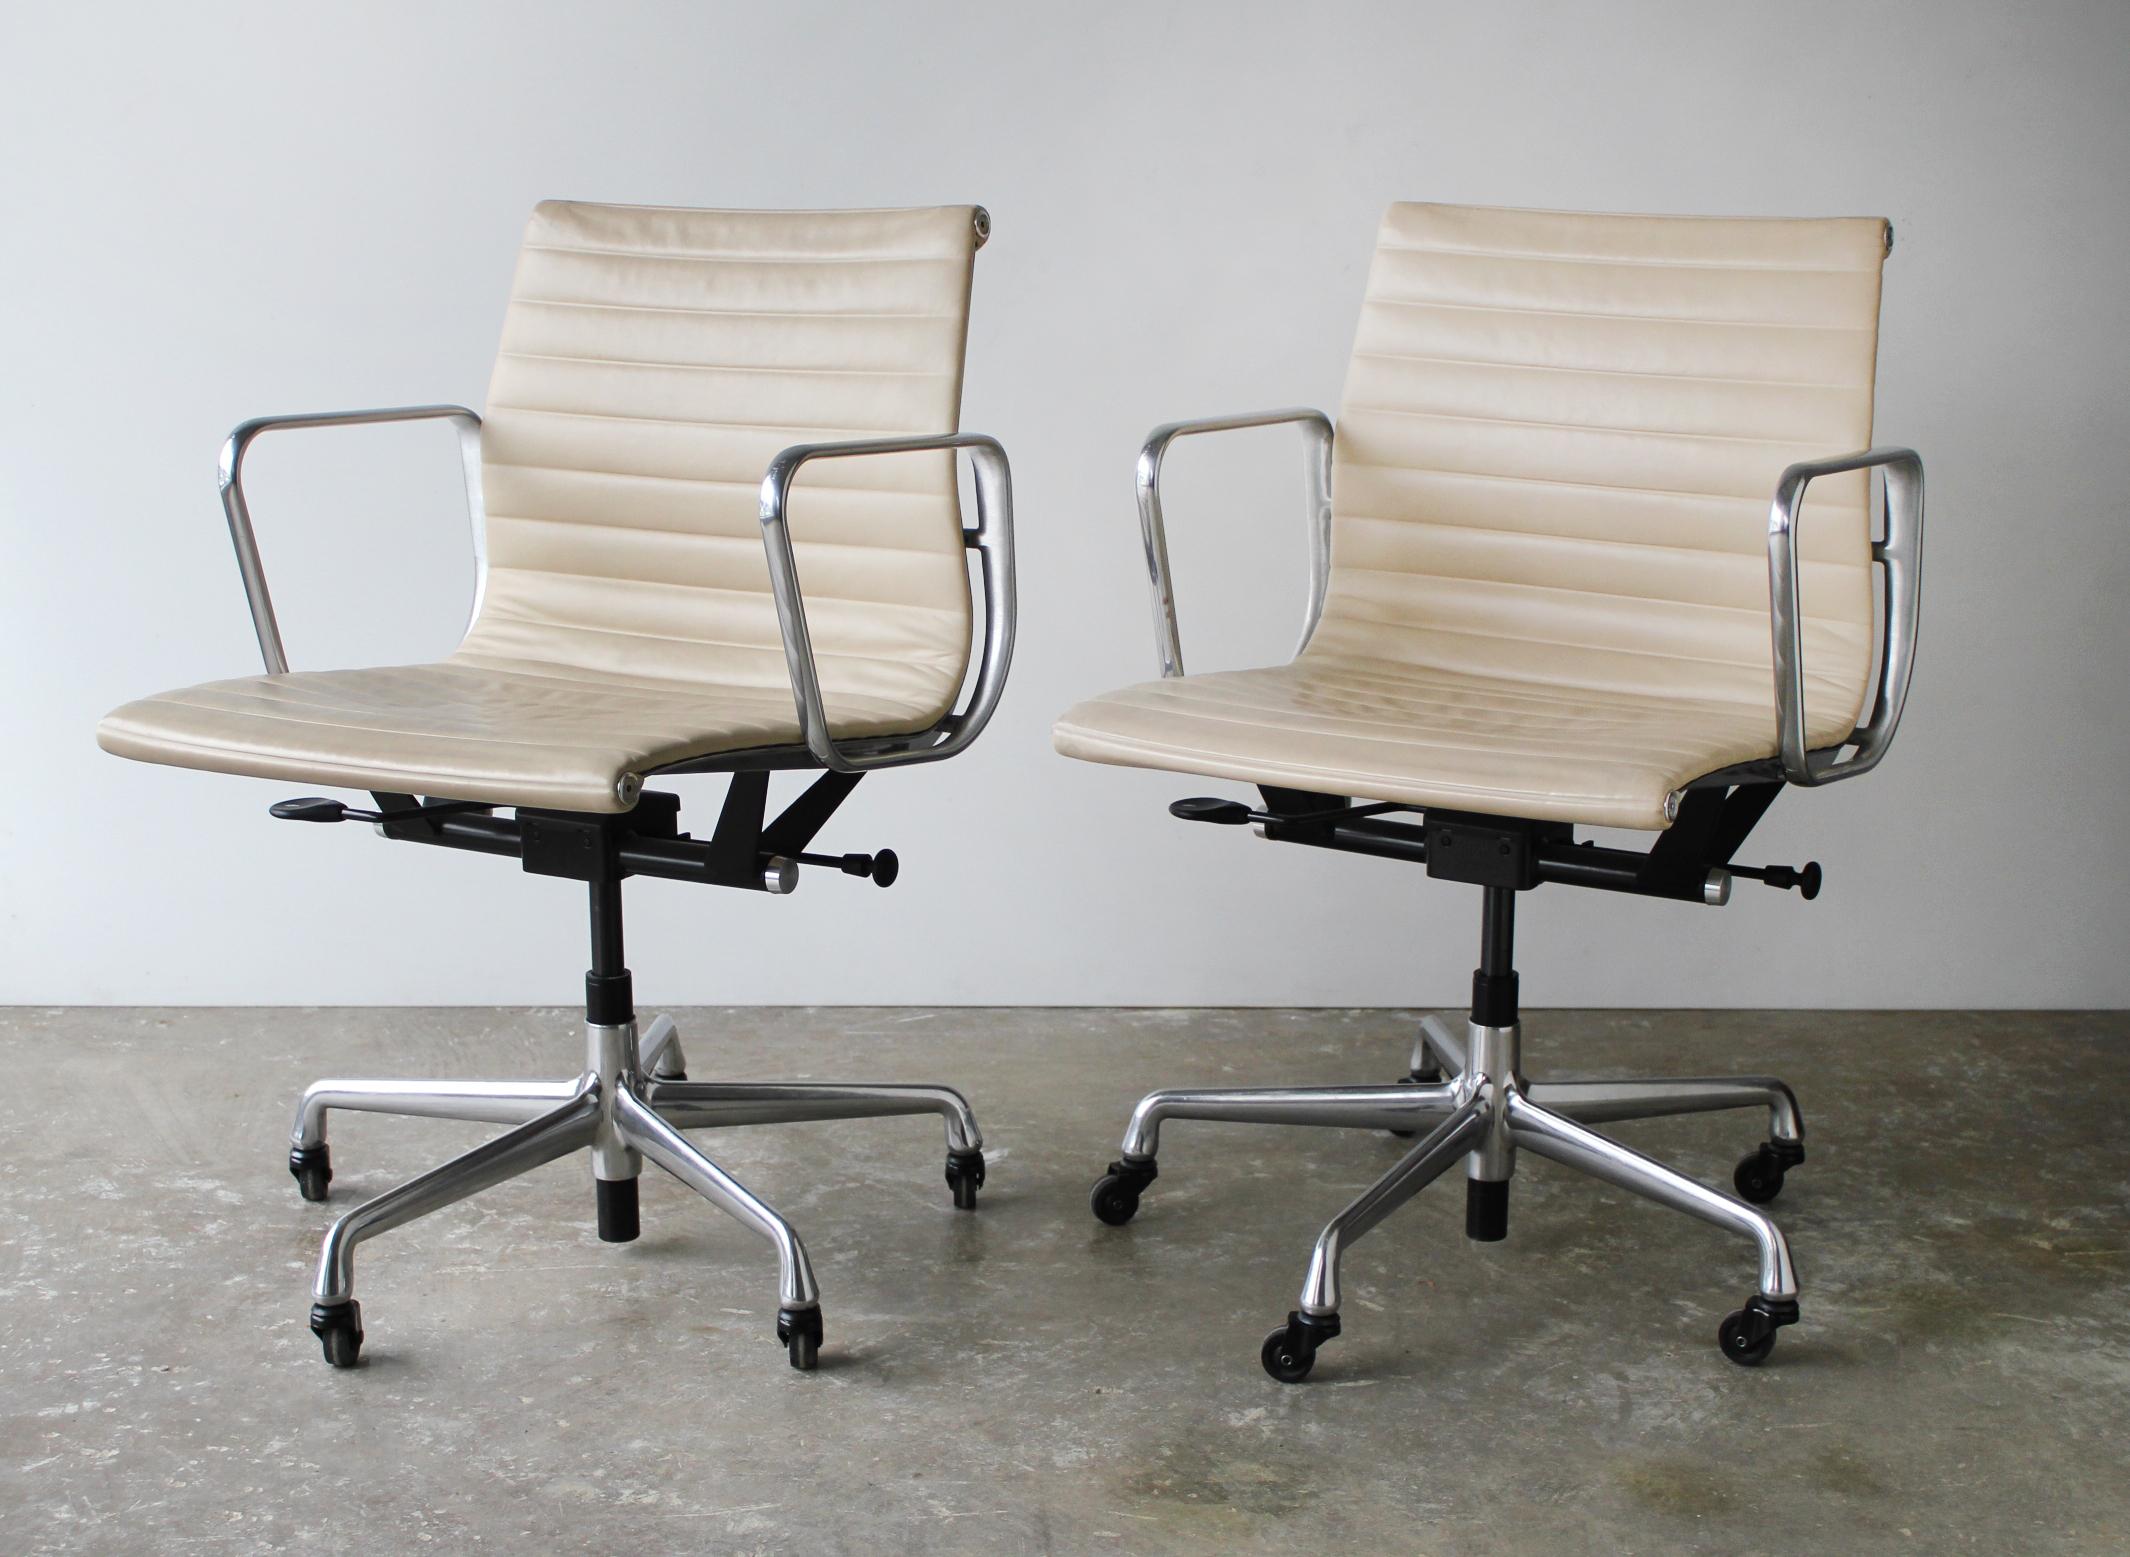 Authentic Charles and Ray Eames Aluminum Group Management chairs produced by Herman Miller. Perfect for a desk, dining or conference table. They are adjustable in height. They tilt and swivel and quite comfortable. These chairs have been lightly